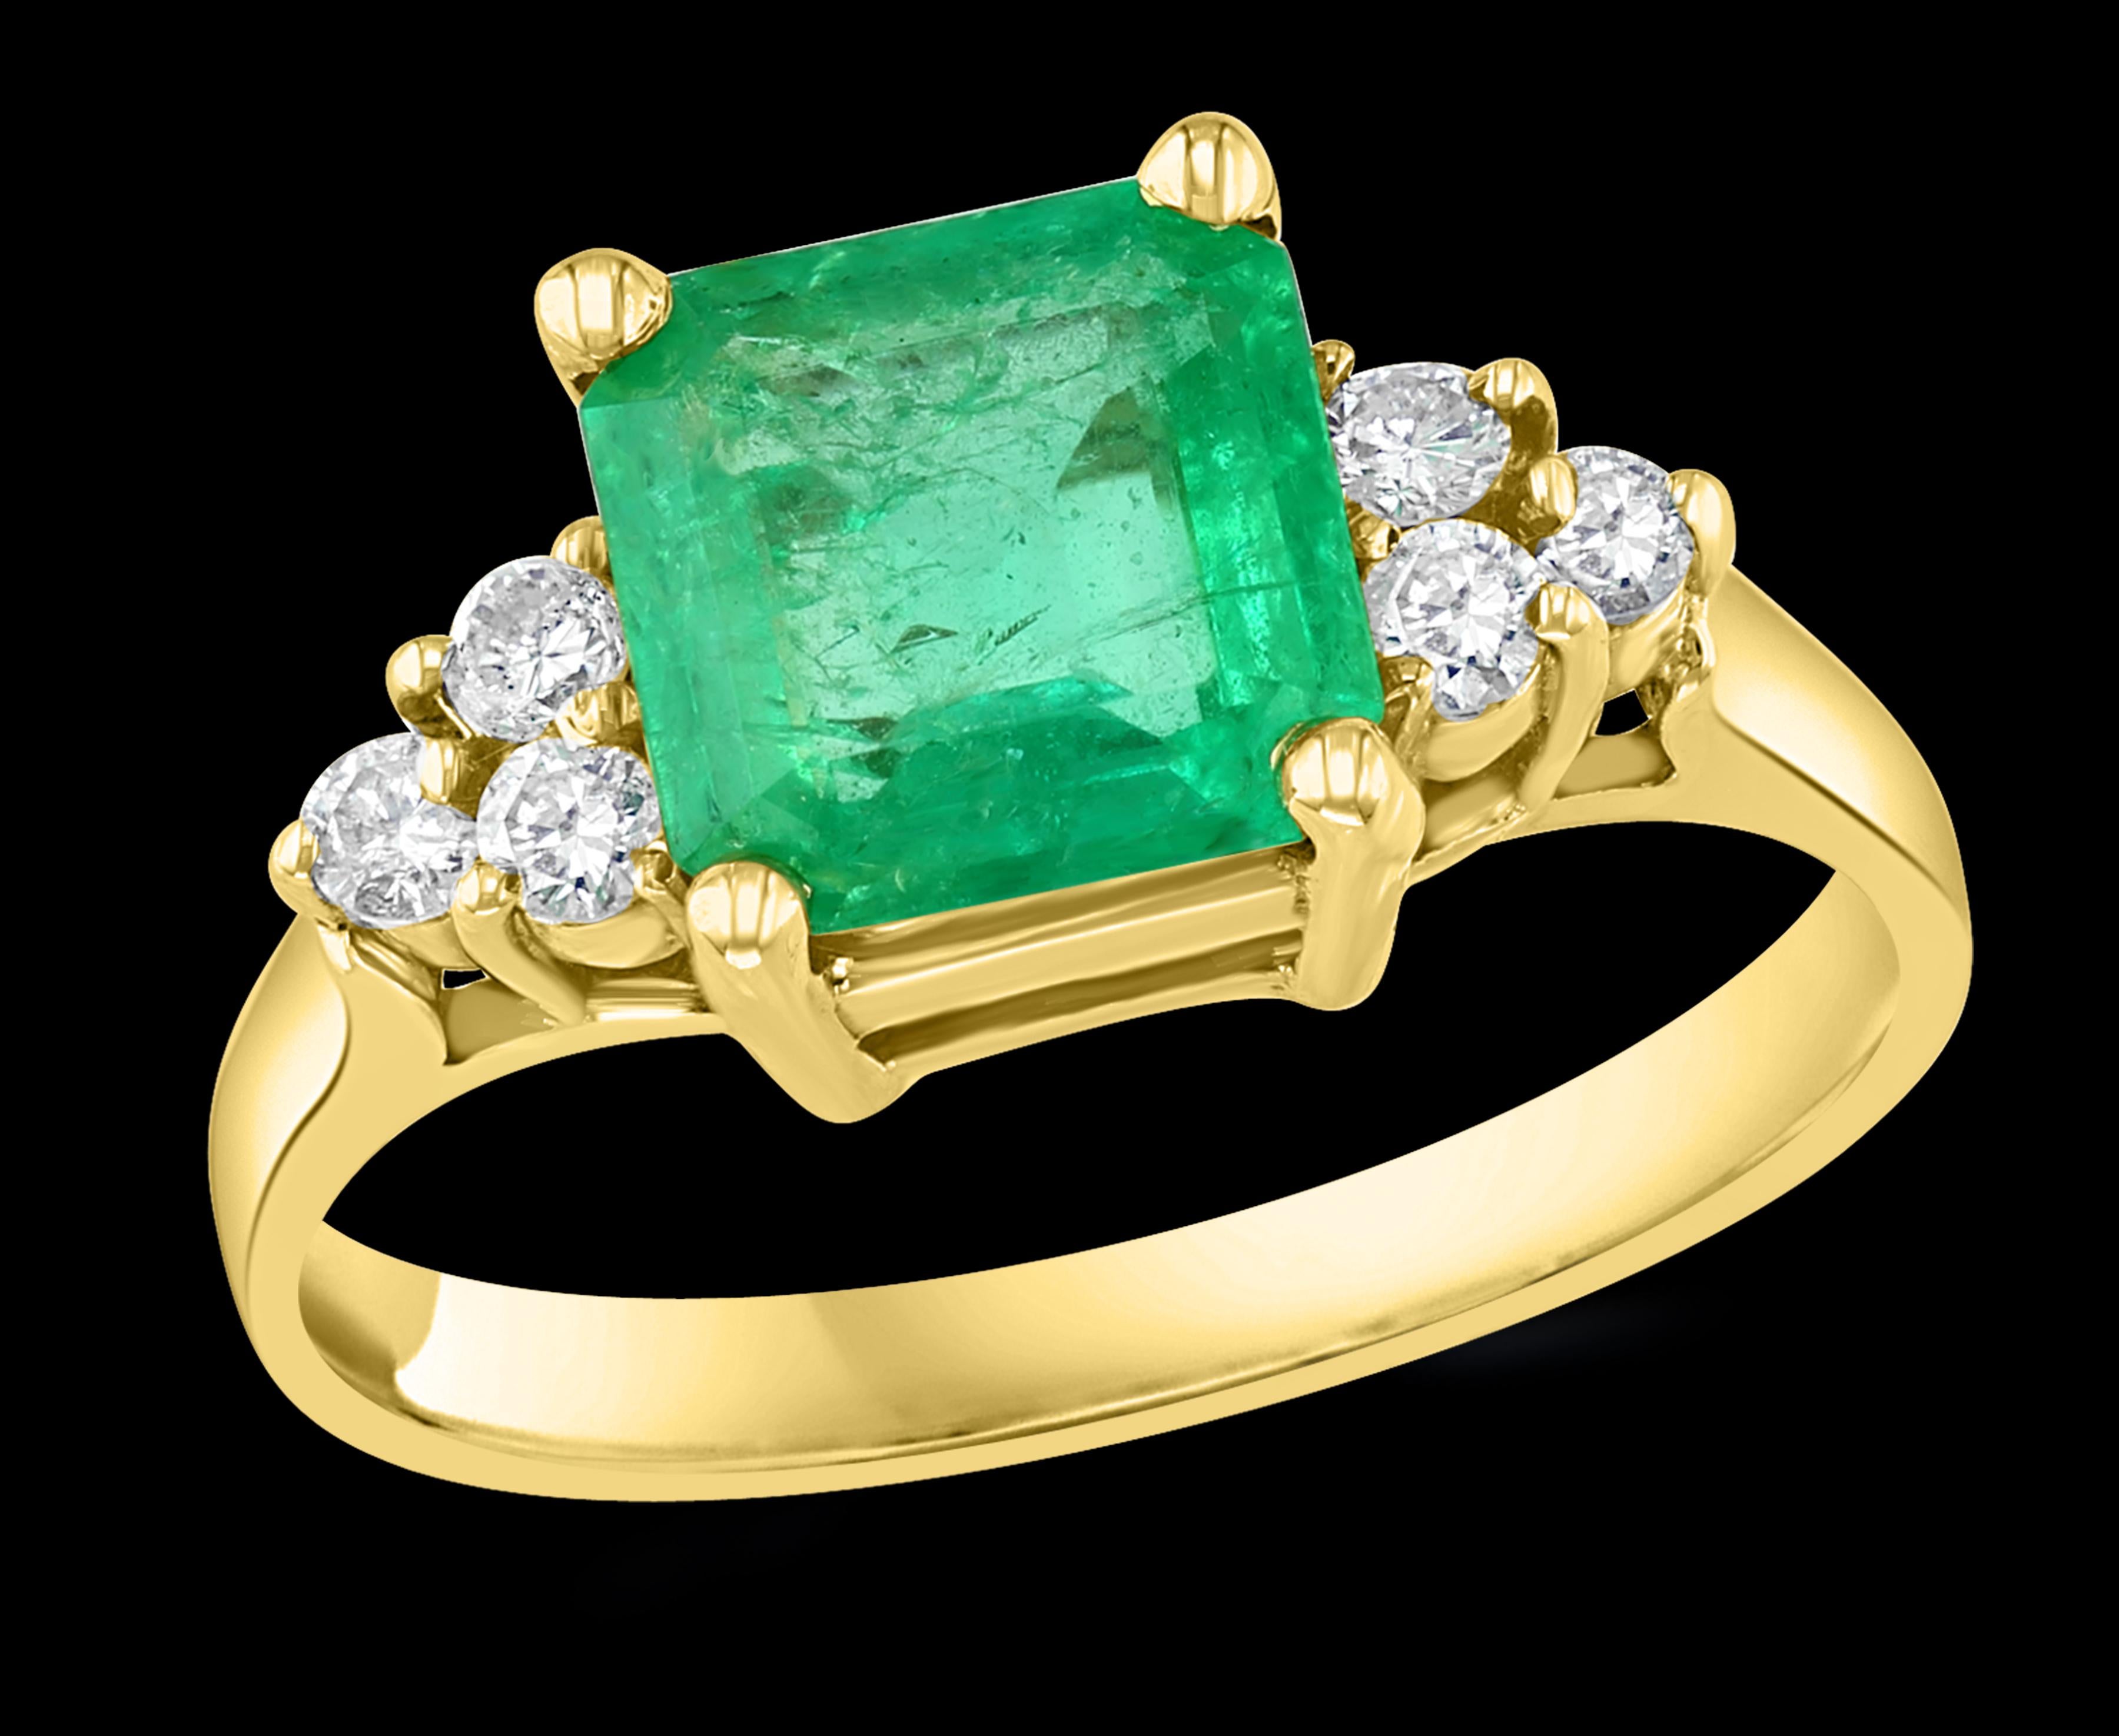 
2 Carat Square Cut Emerald & 0.25 Carat Diamond Ring 14 Karat Yellow Gold 
Emeralds are very precious , Very Difficult to find and getting more more difficult to find.
A classic, Cocktail ring 
Emerald measurements 7.5x7.5 which is approximately 2